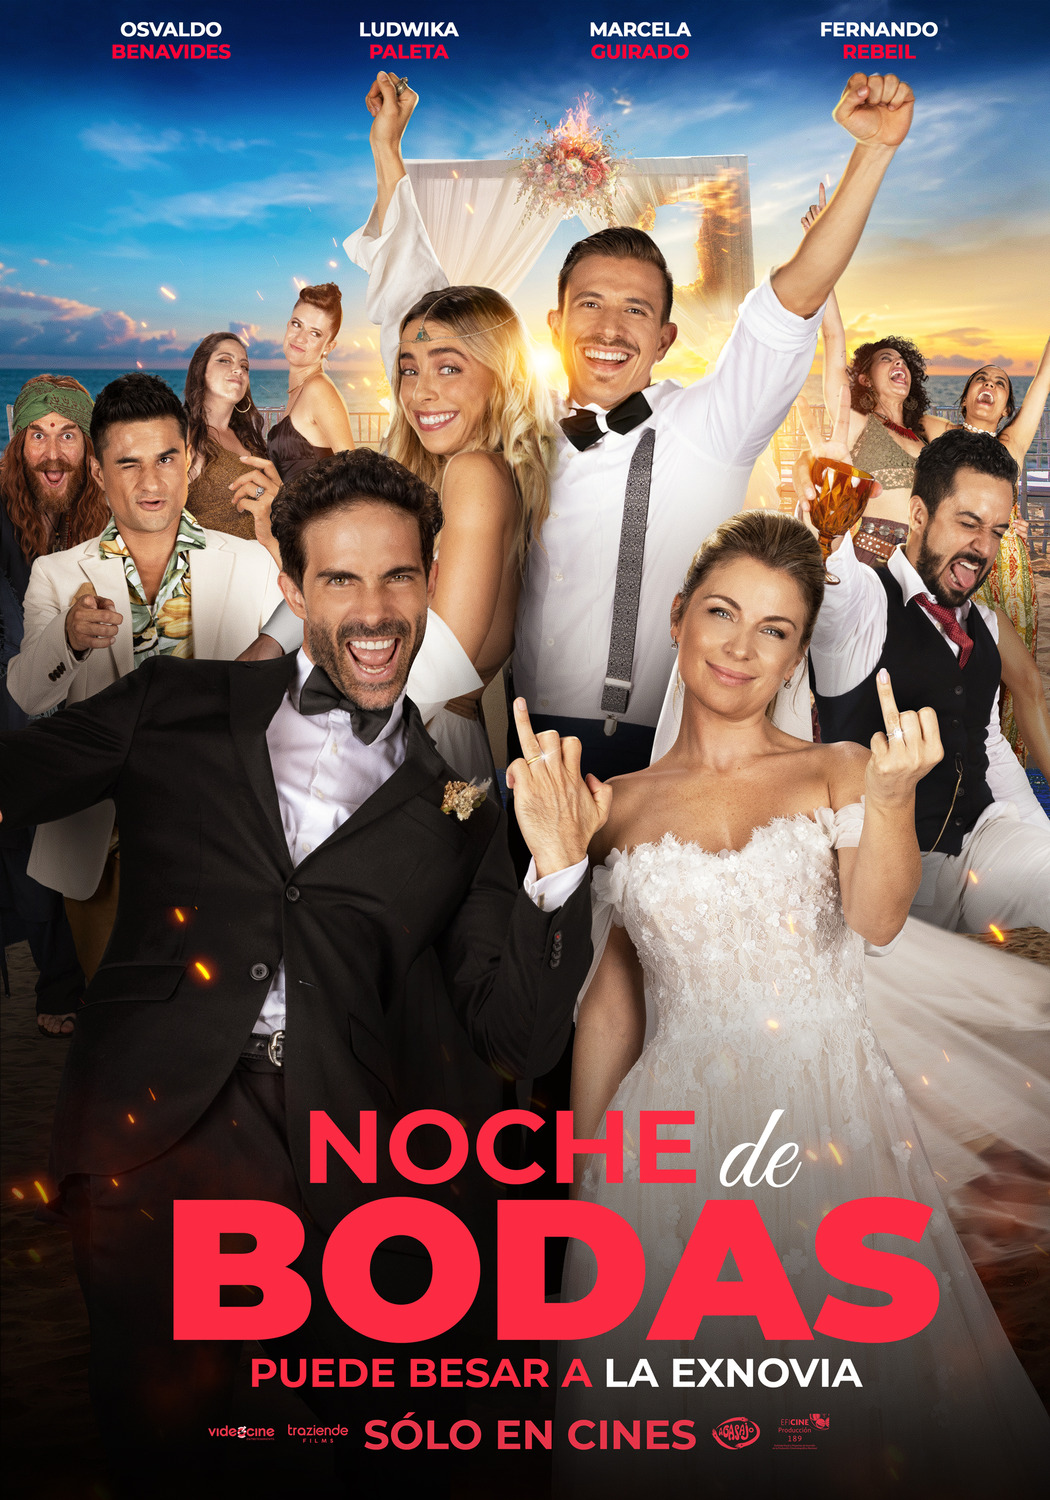 Extra Large Movie Poster Image for Noche de bodas (#2 of 2)